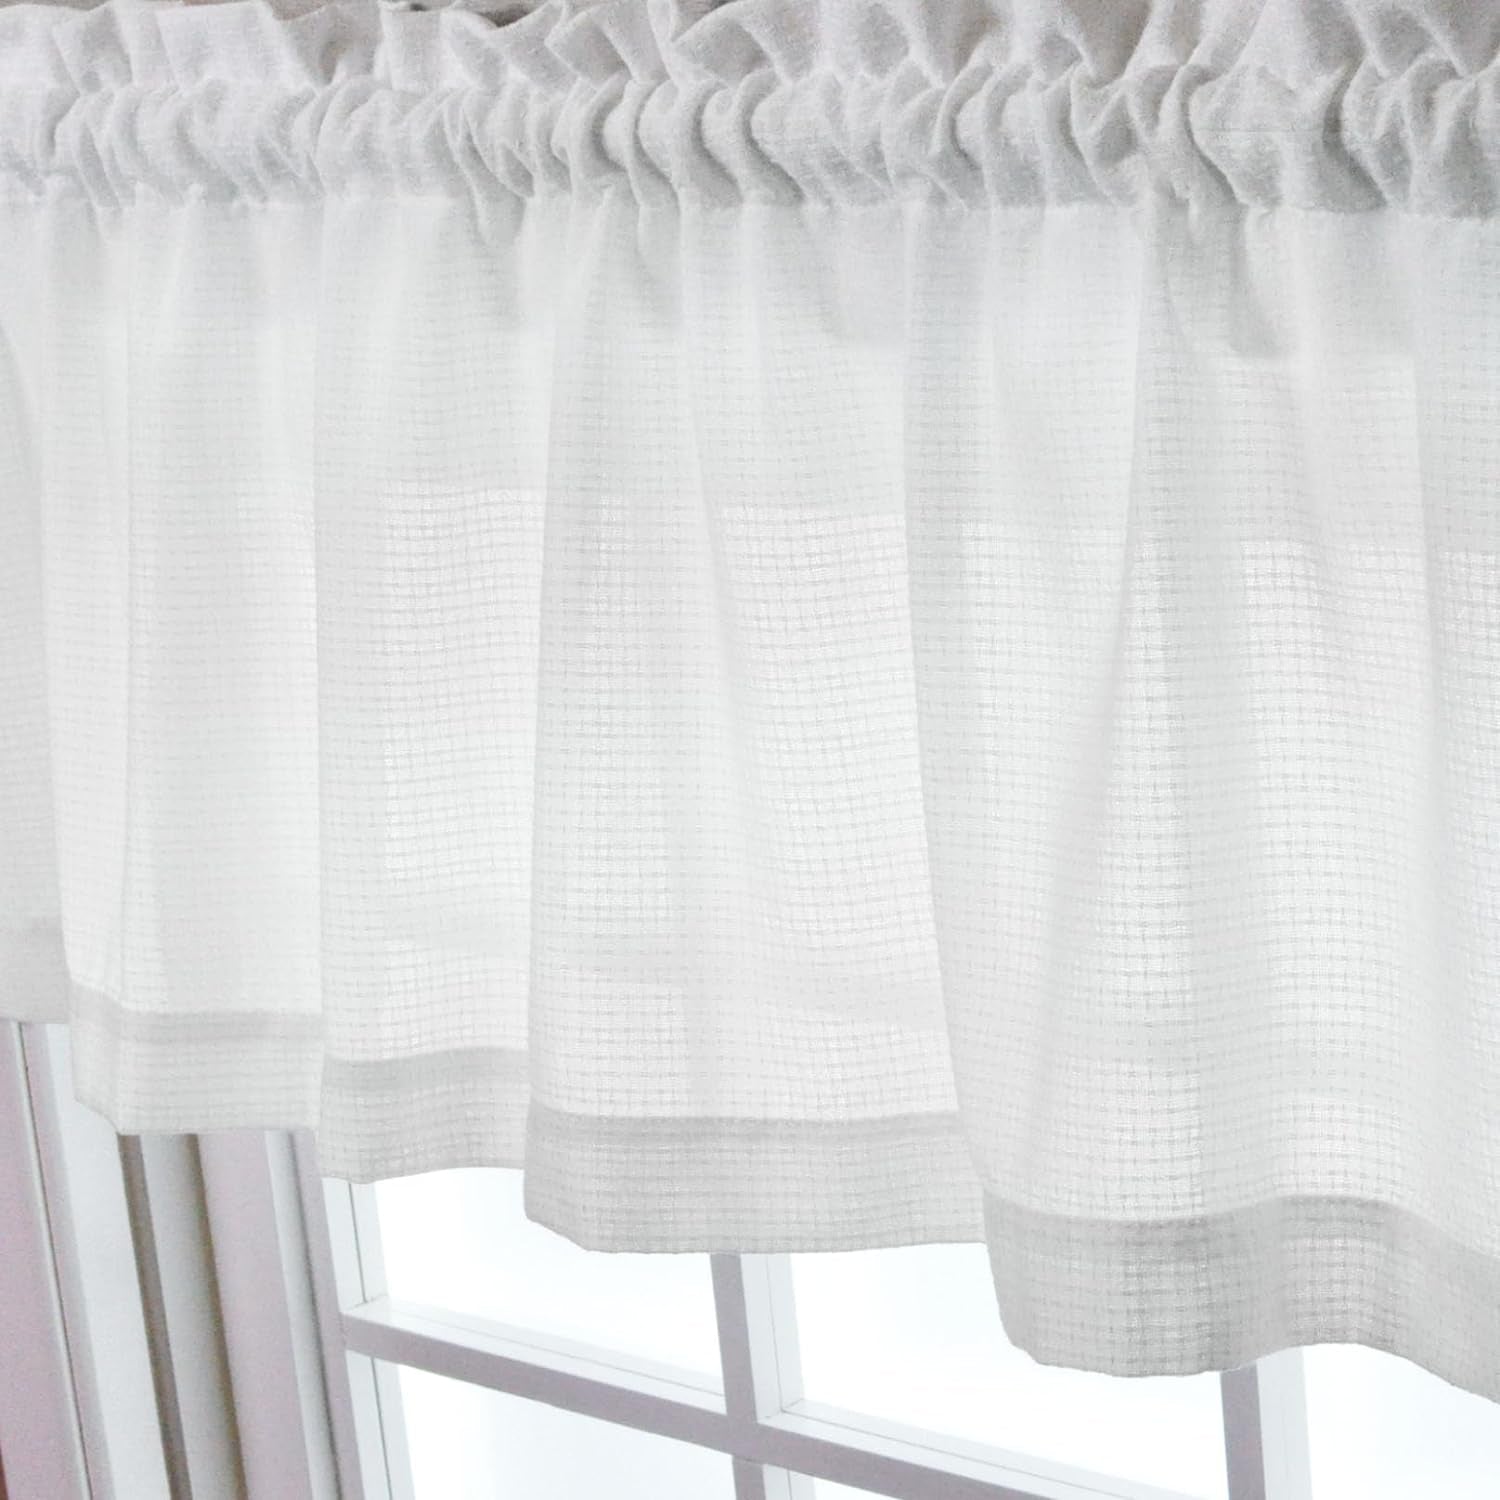 2 Pack White Valances for Windows Semi Sheer Kitchen Valance Bedroom Bathroom Small Window Cafe Curtains, 54X15 Inches